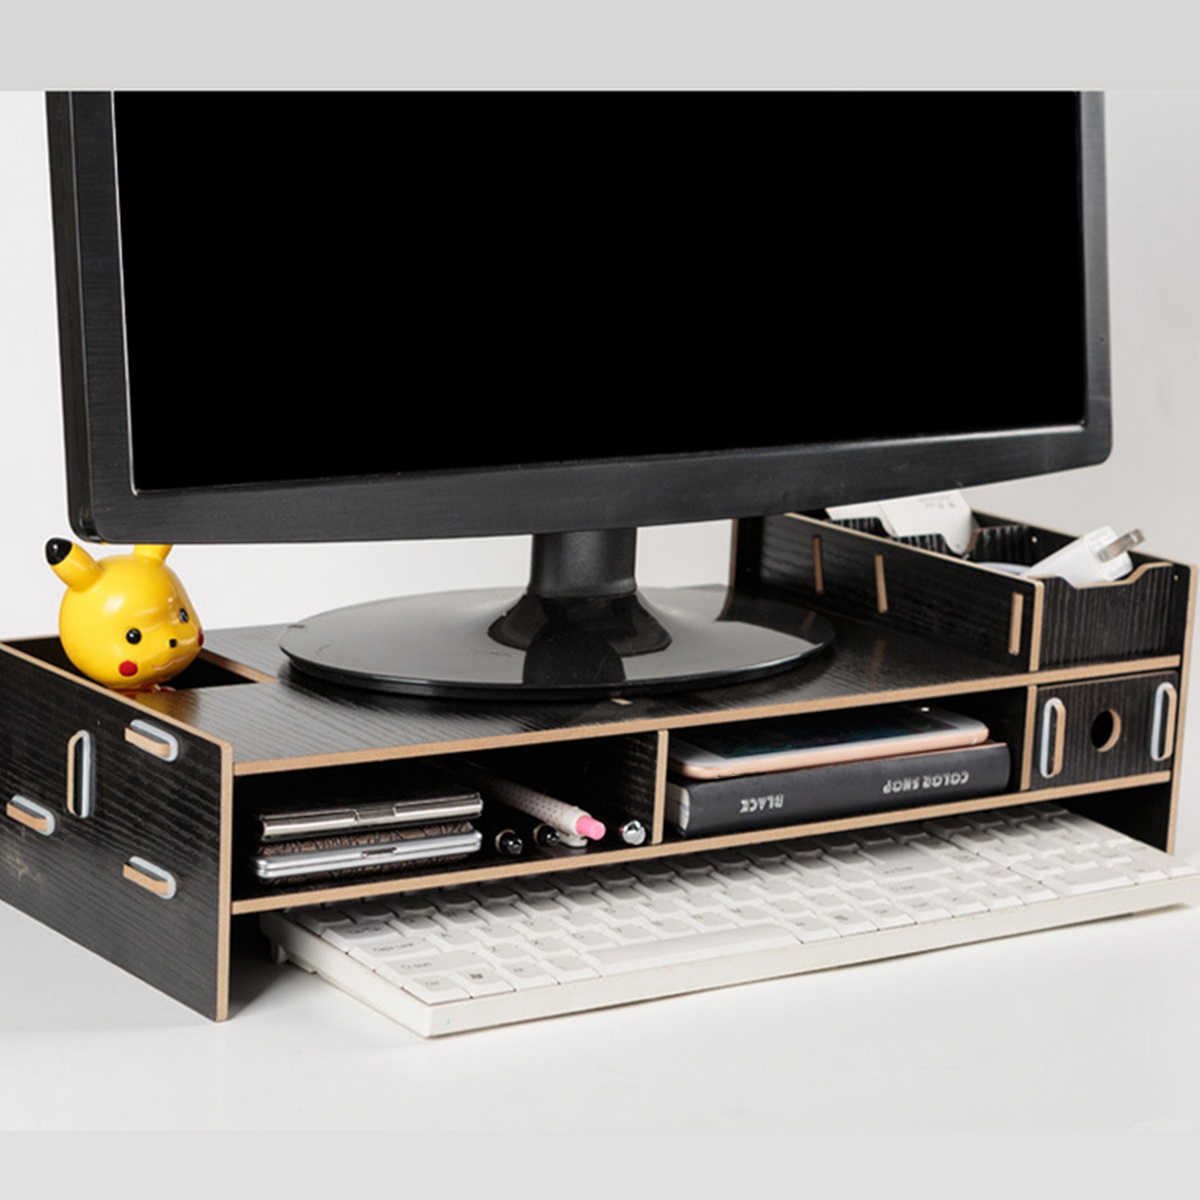 Multi-function-Desktop-Laptop-Stand-Computer-Monitor-Stand-Computer-Screen-Riser-Wood-Shelf-For-Note-1642233-3